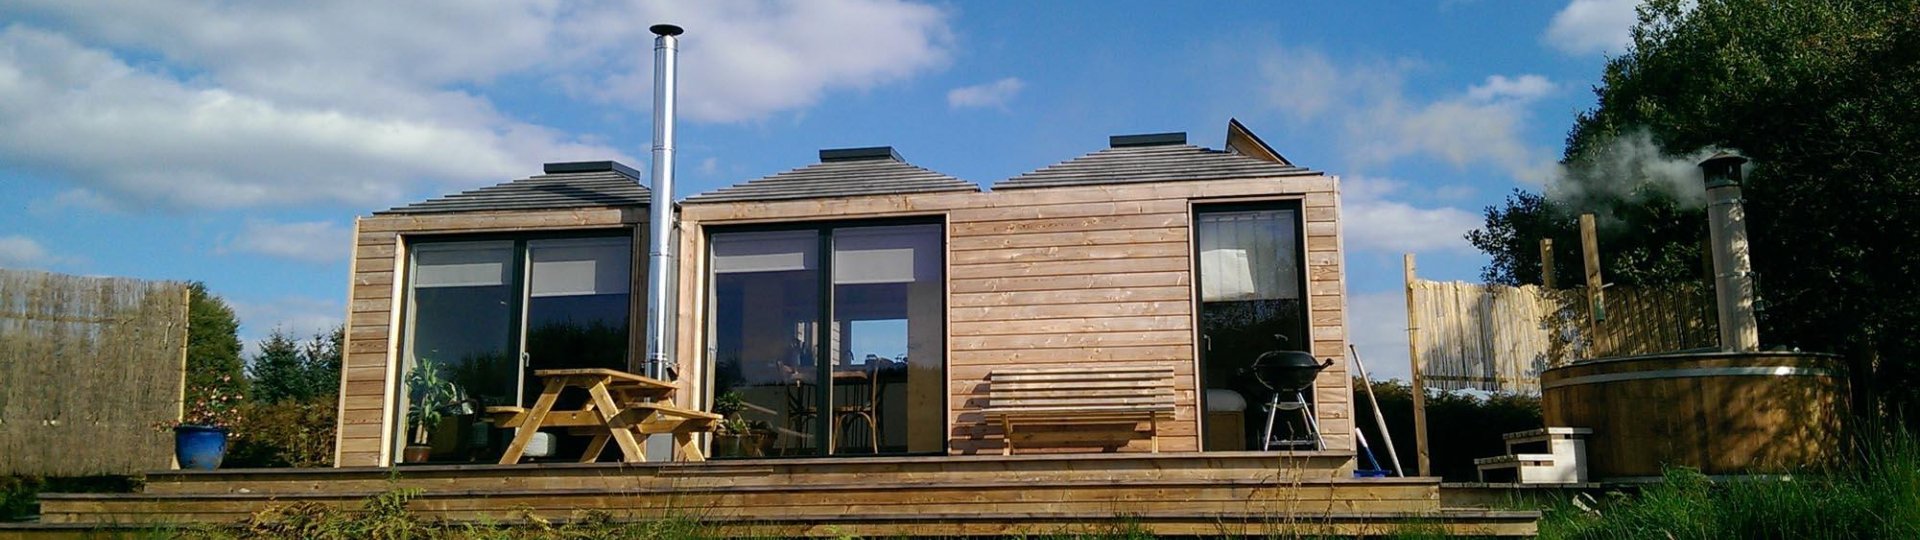 An image showing the exterior of red squirrel at Loch Ken Eco Bothies self catering accommodation ec